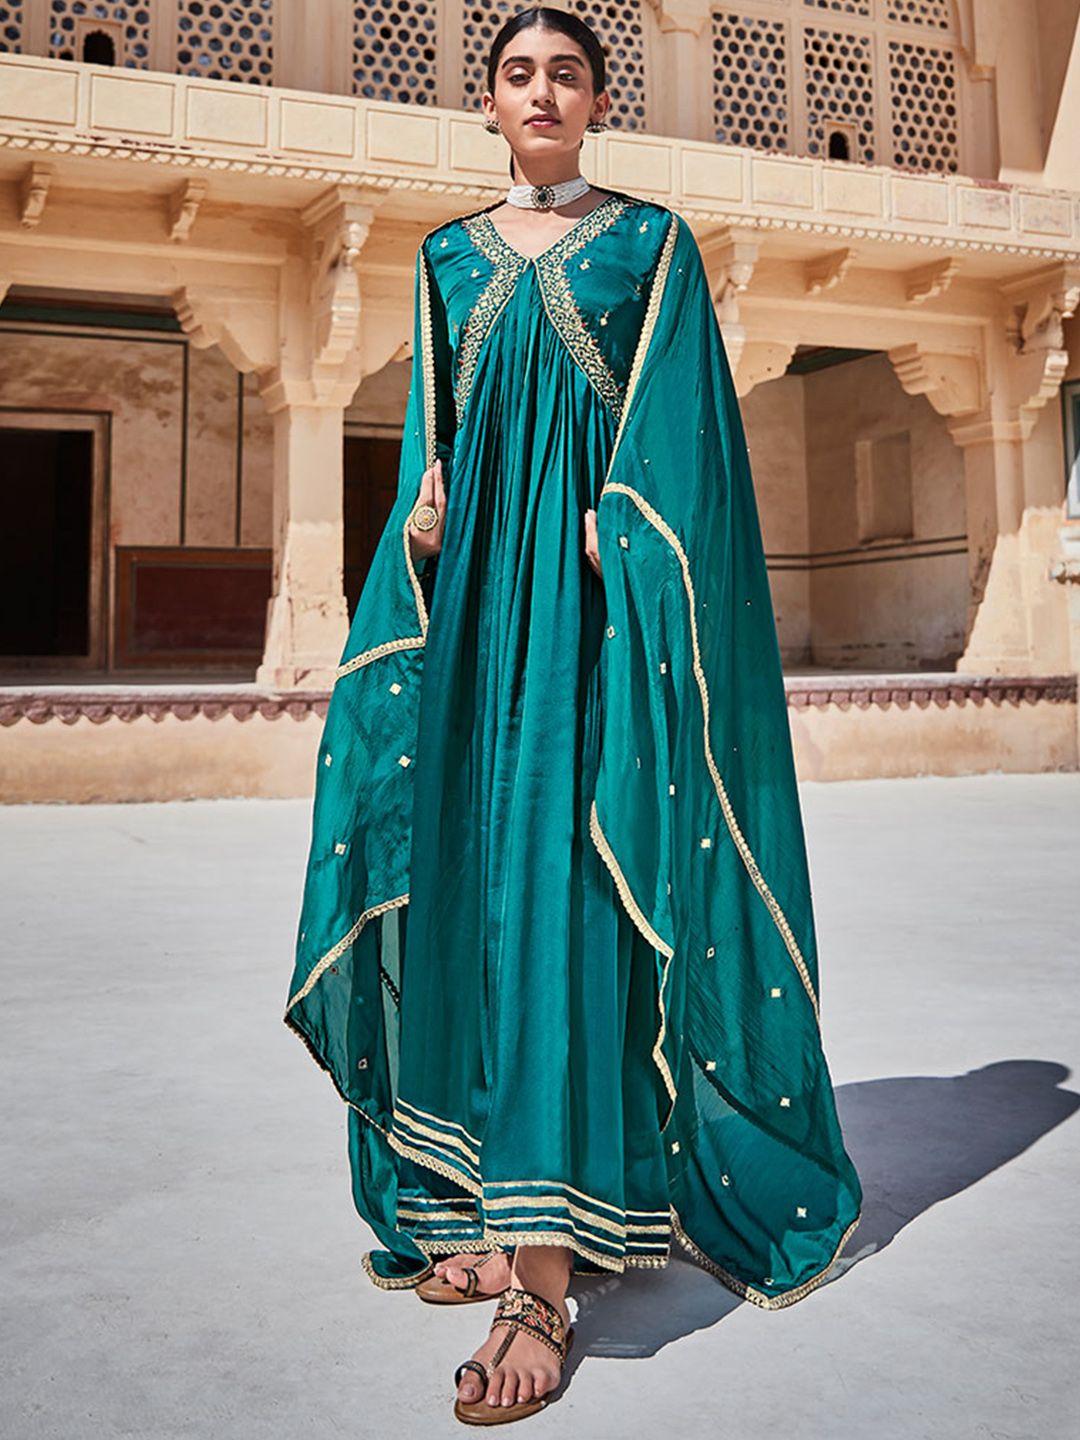 jaipur kurti green & gold-toned ethnic motifs embroidered a-line maxi ethnic dress